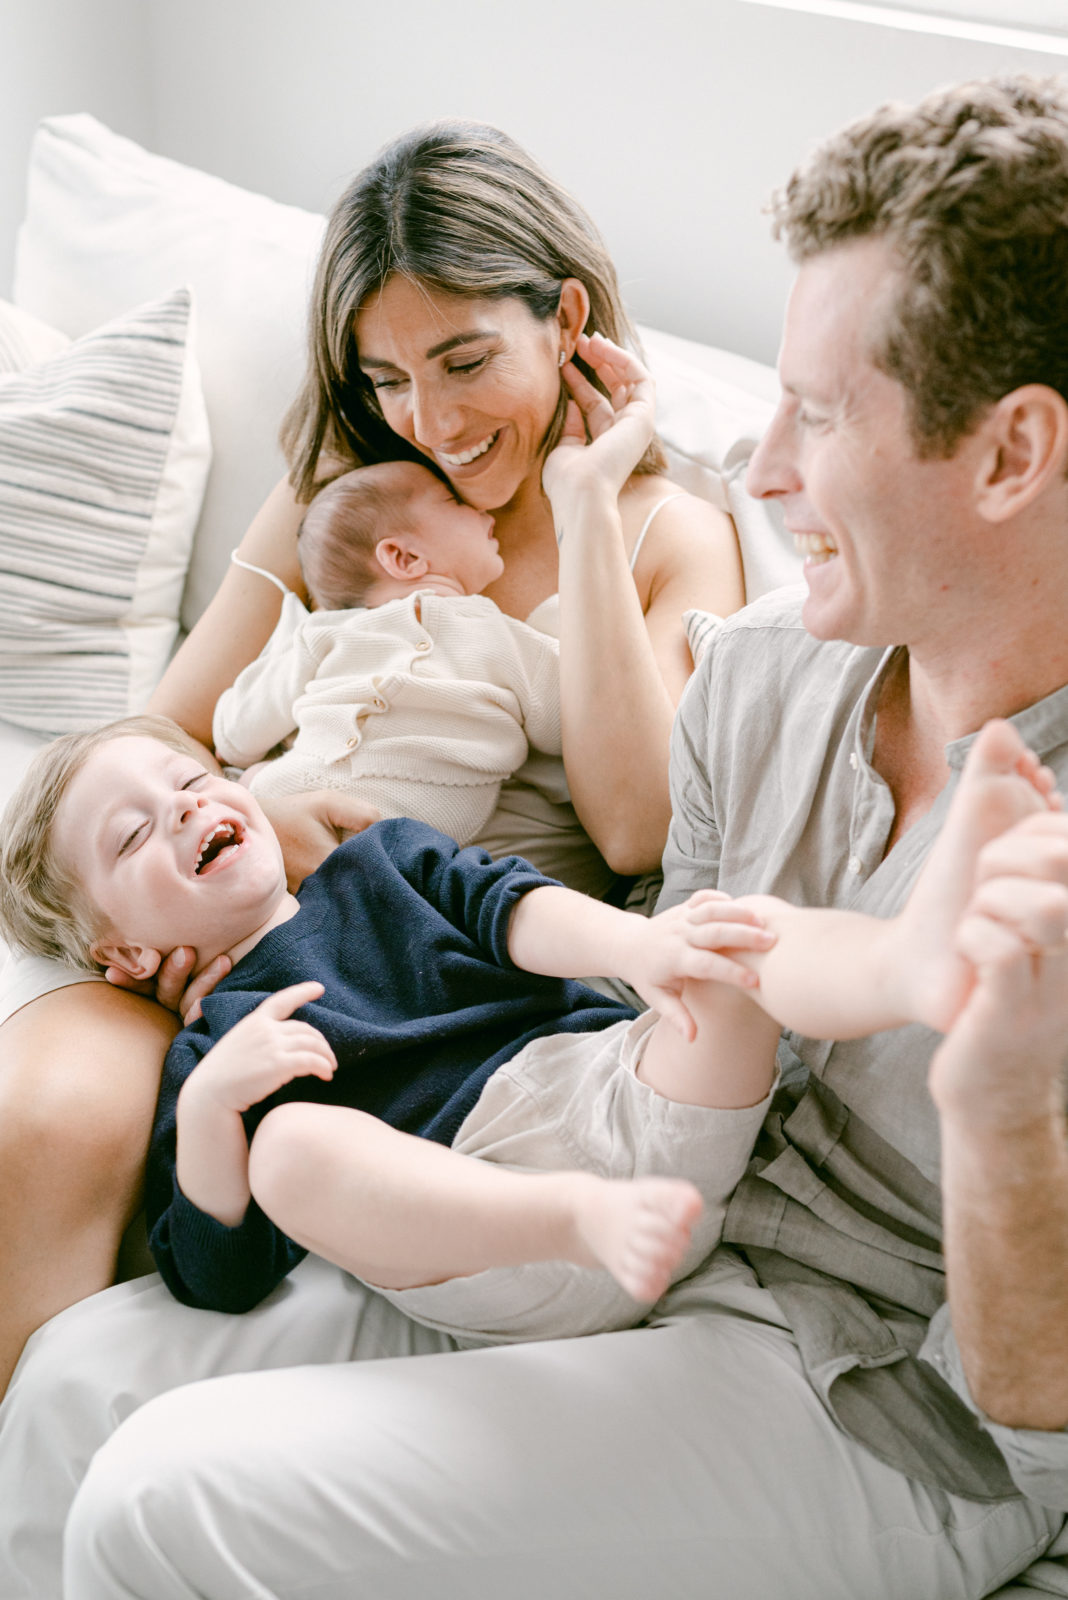 Lifestyle newborn sessions are all about love and laughter